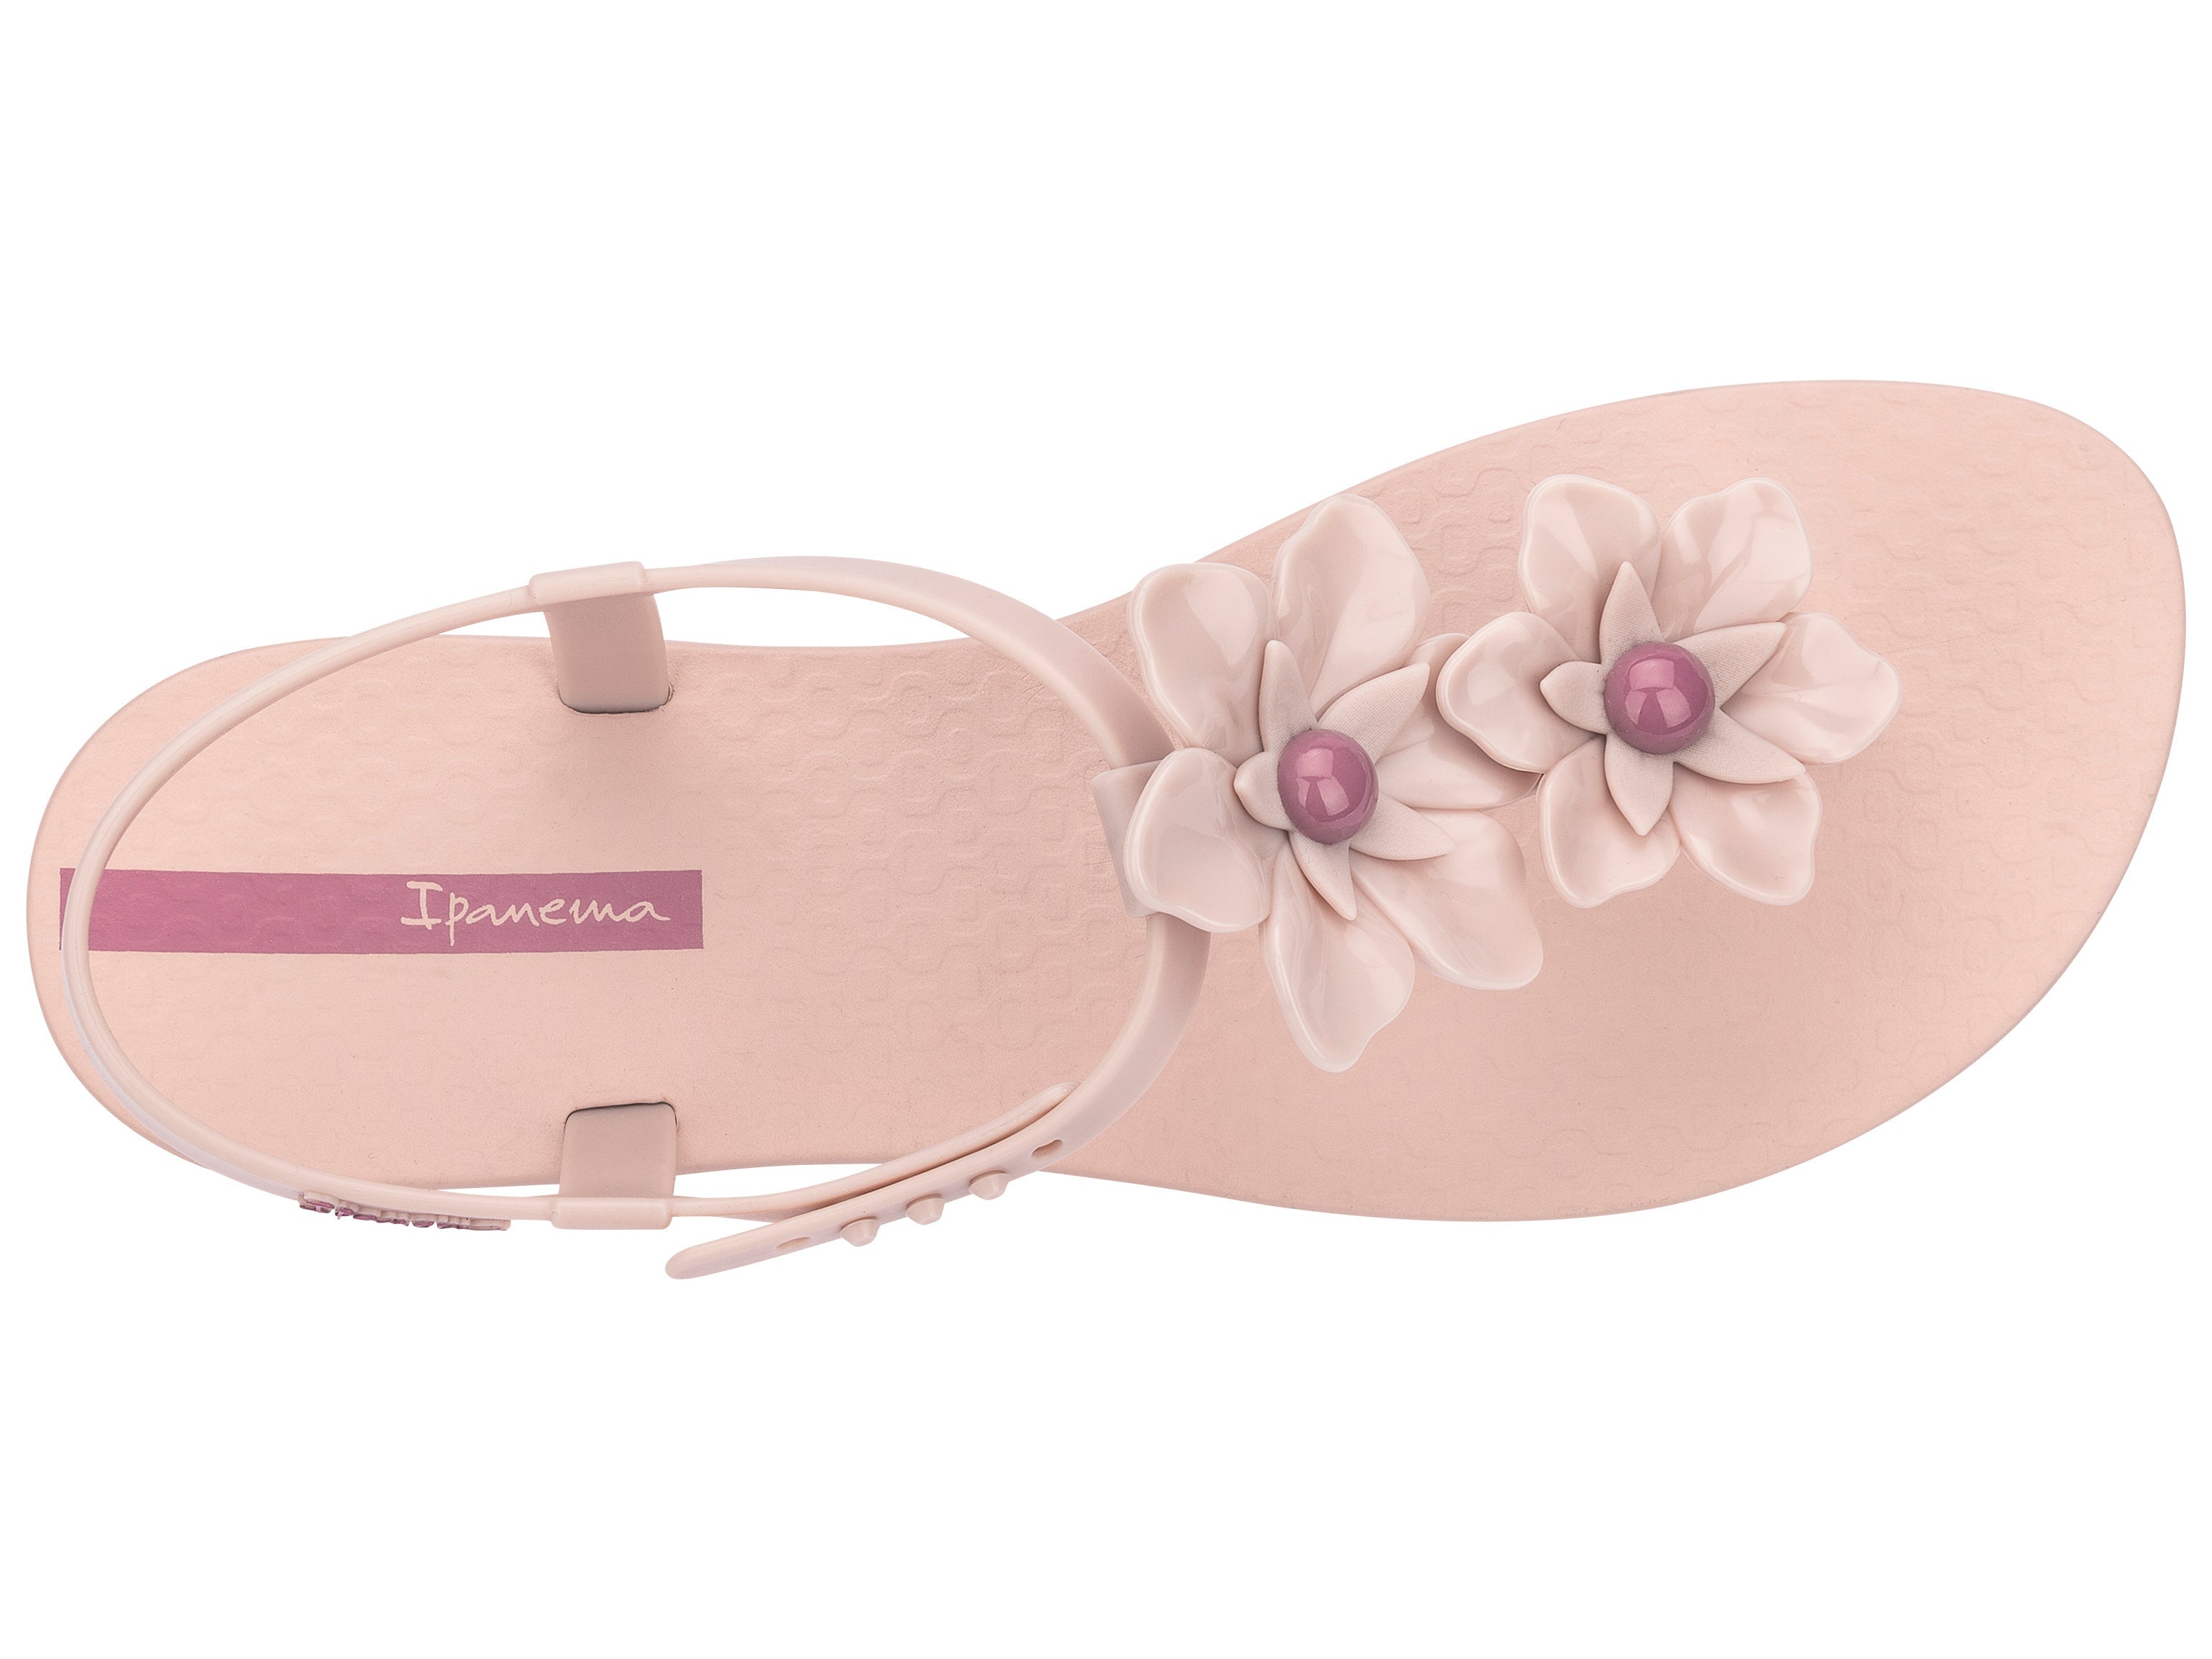 Top view of a pink Ipanema Duo Flowers women's t-strap sandal with two flowers.